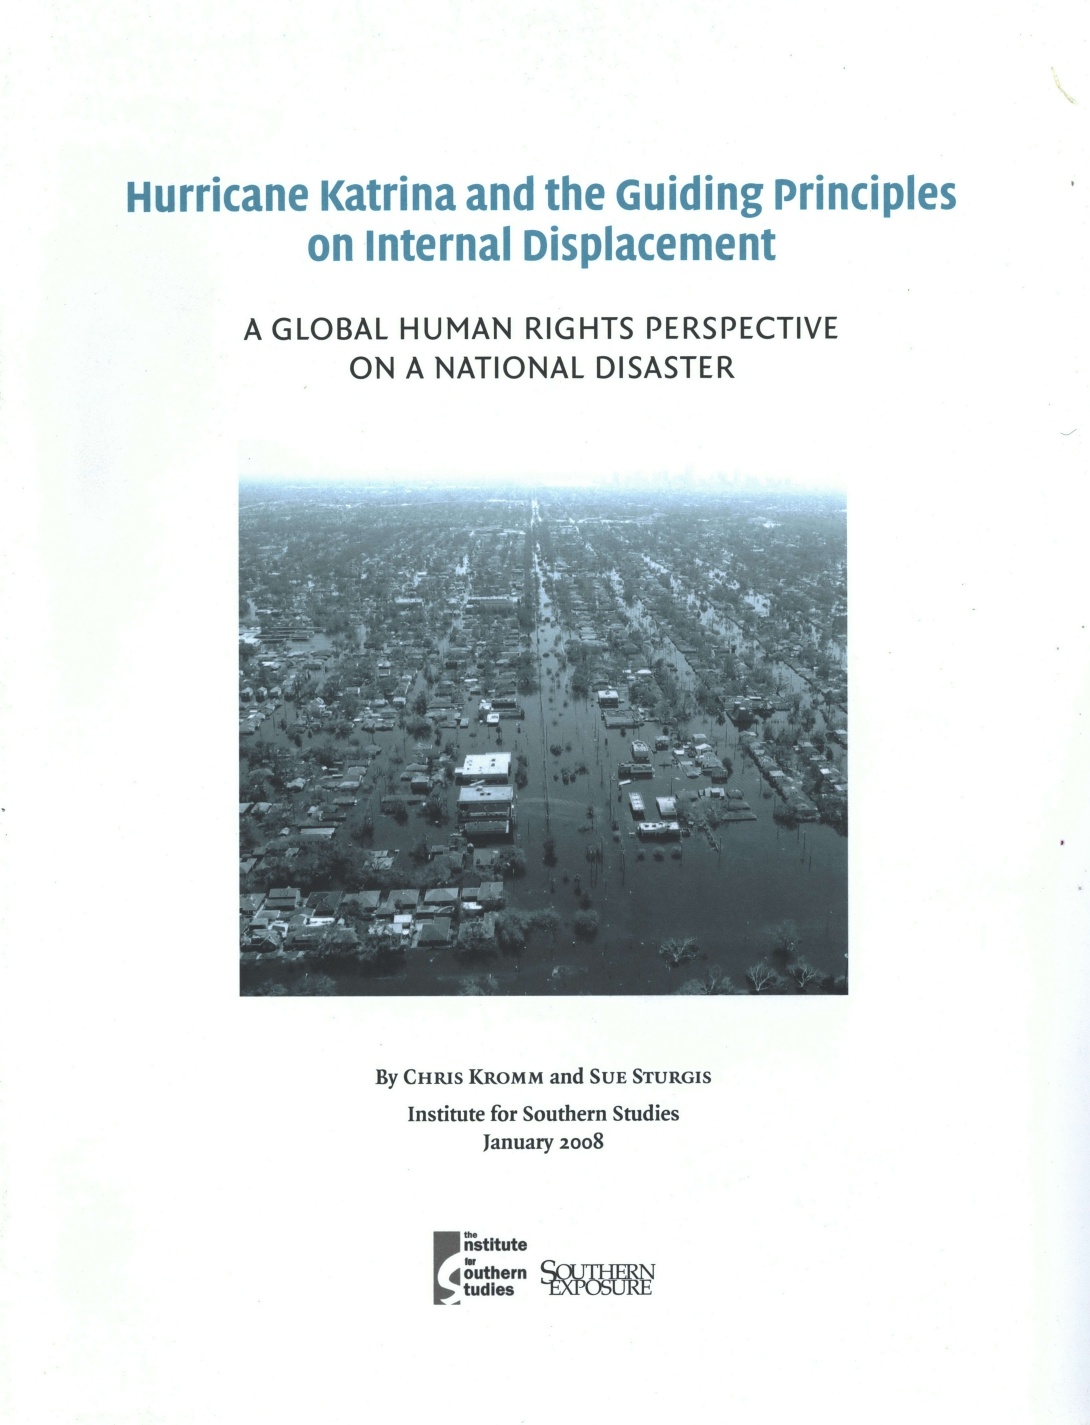 Report cover with aerial photo of flooded area, text reads "Hurricane Katrina and the Guiding Principles on Internal Displacement: A Global Human Rights Perspective on a National Disaster"